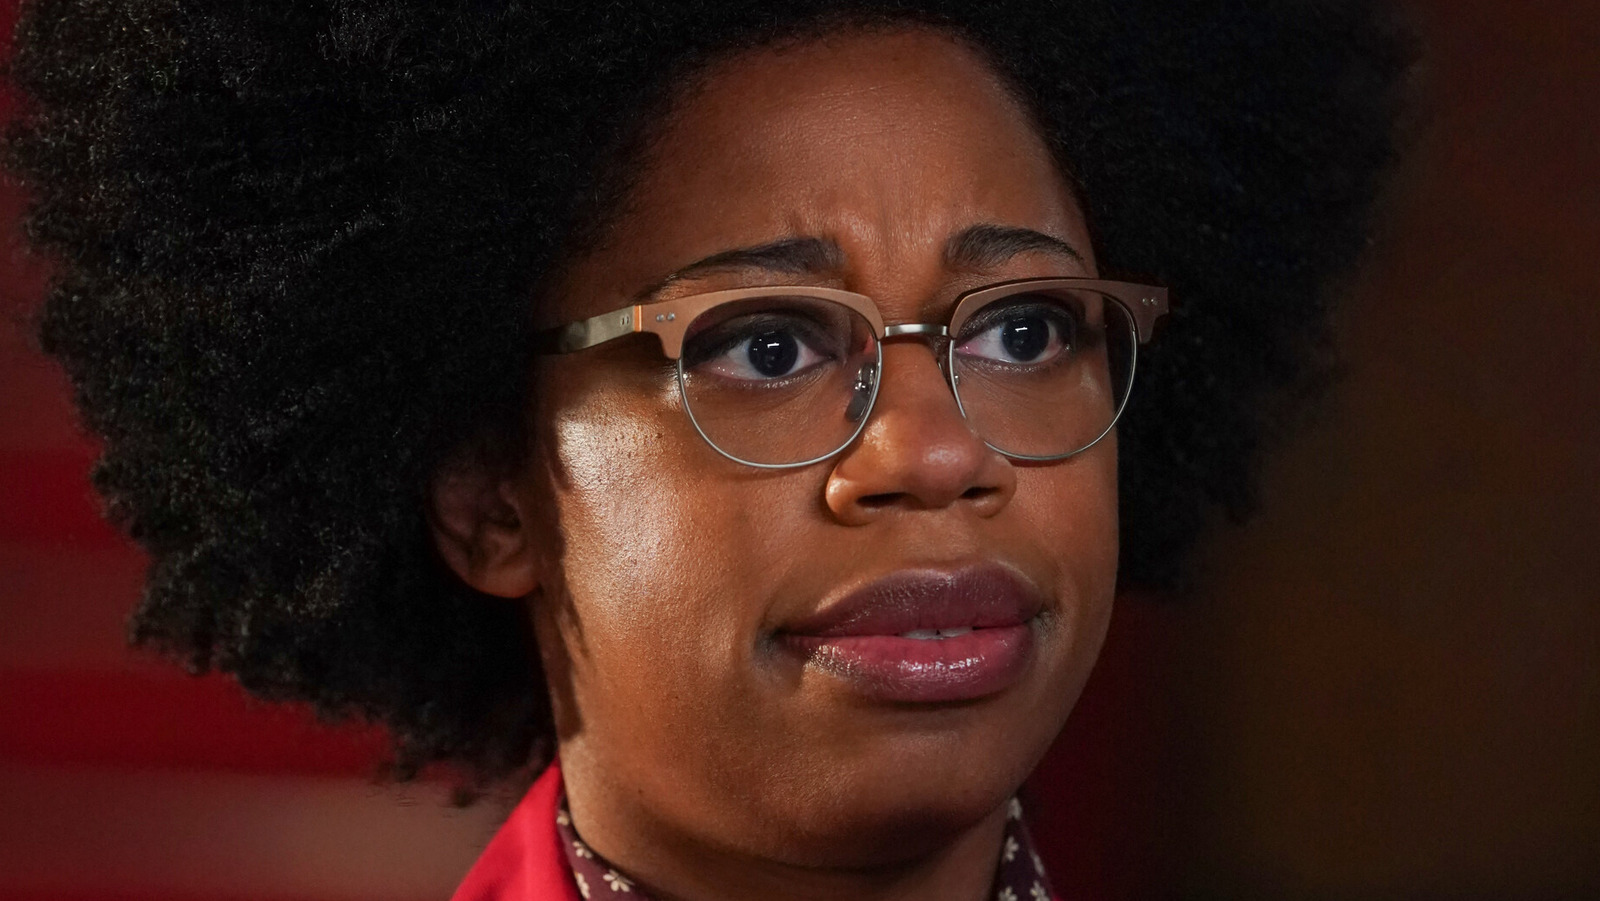 NCIS: Diona Reasonover originally envisioned a different storyline when she co-wrote her first episode.